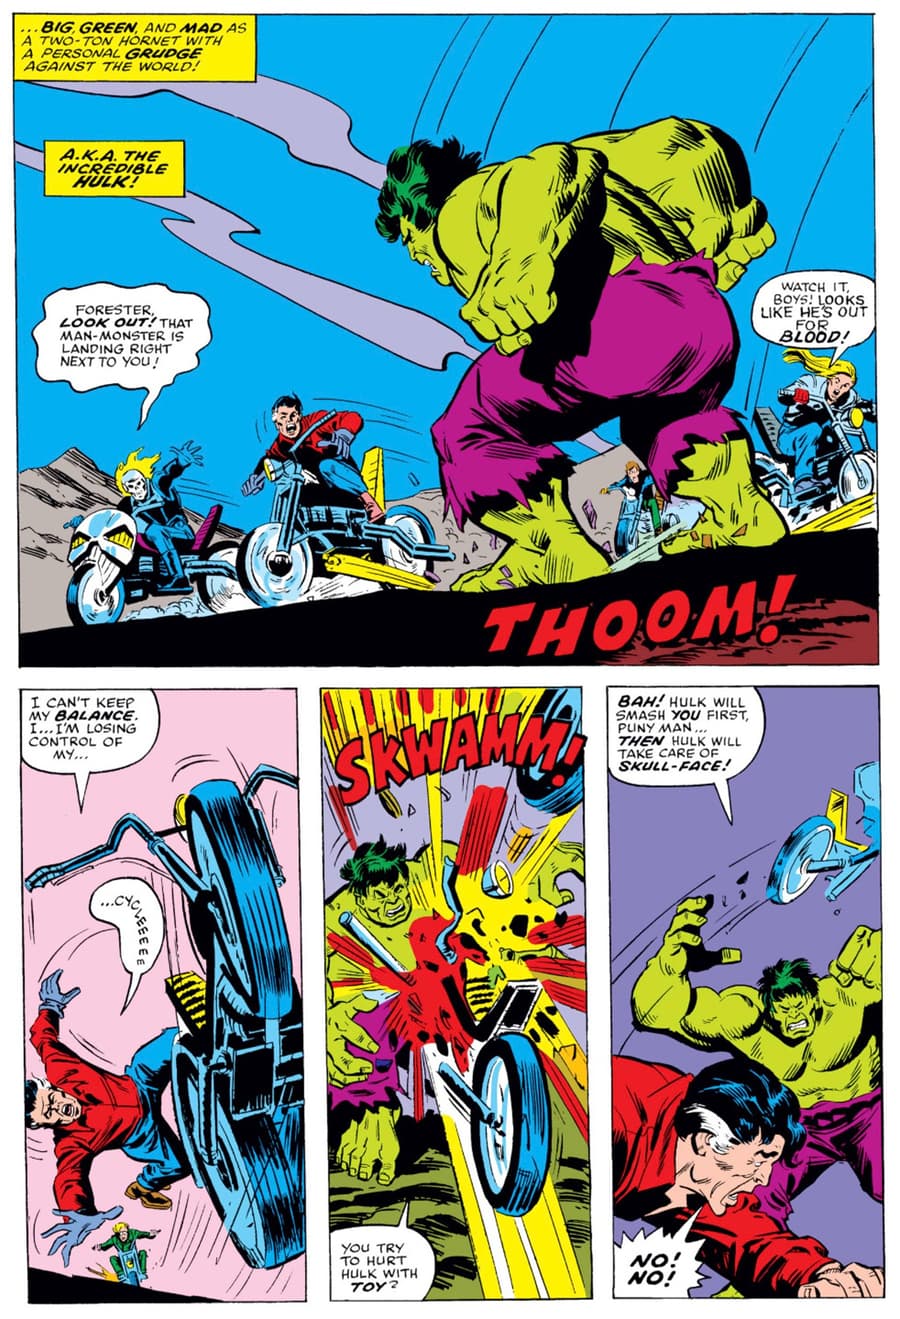 GHOST RIDER (1973) #11 page by Steve Gerber and Sal Buscema